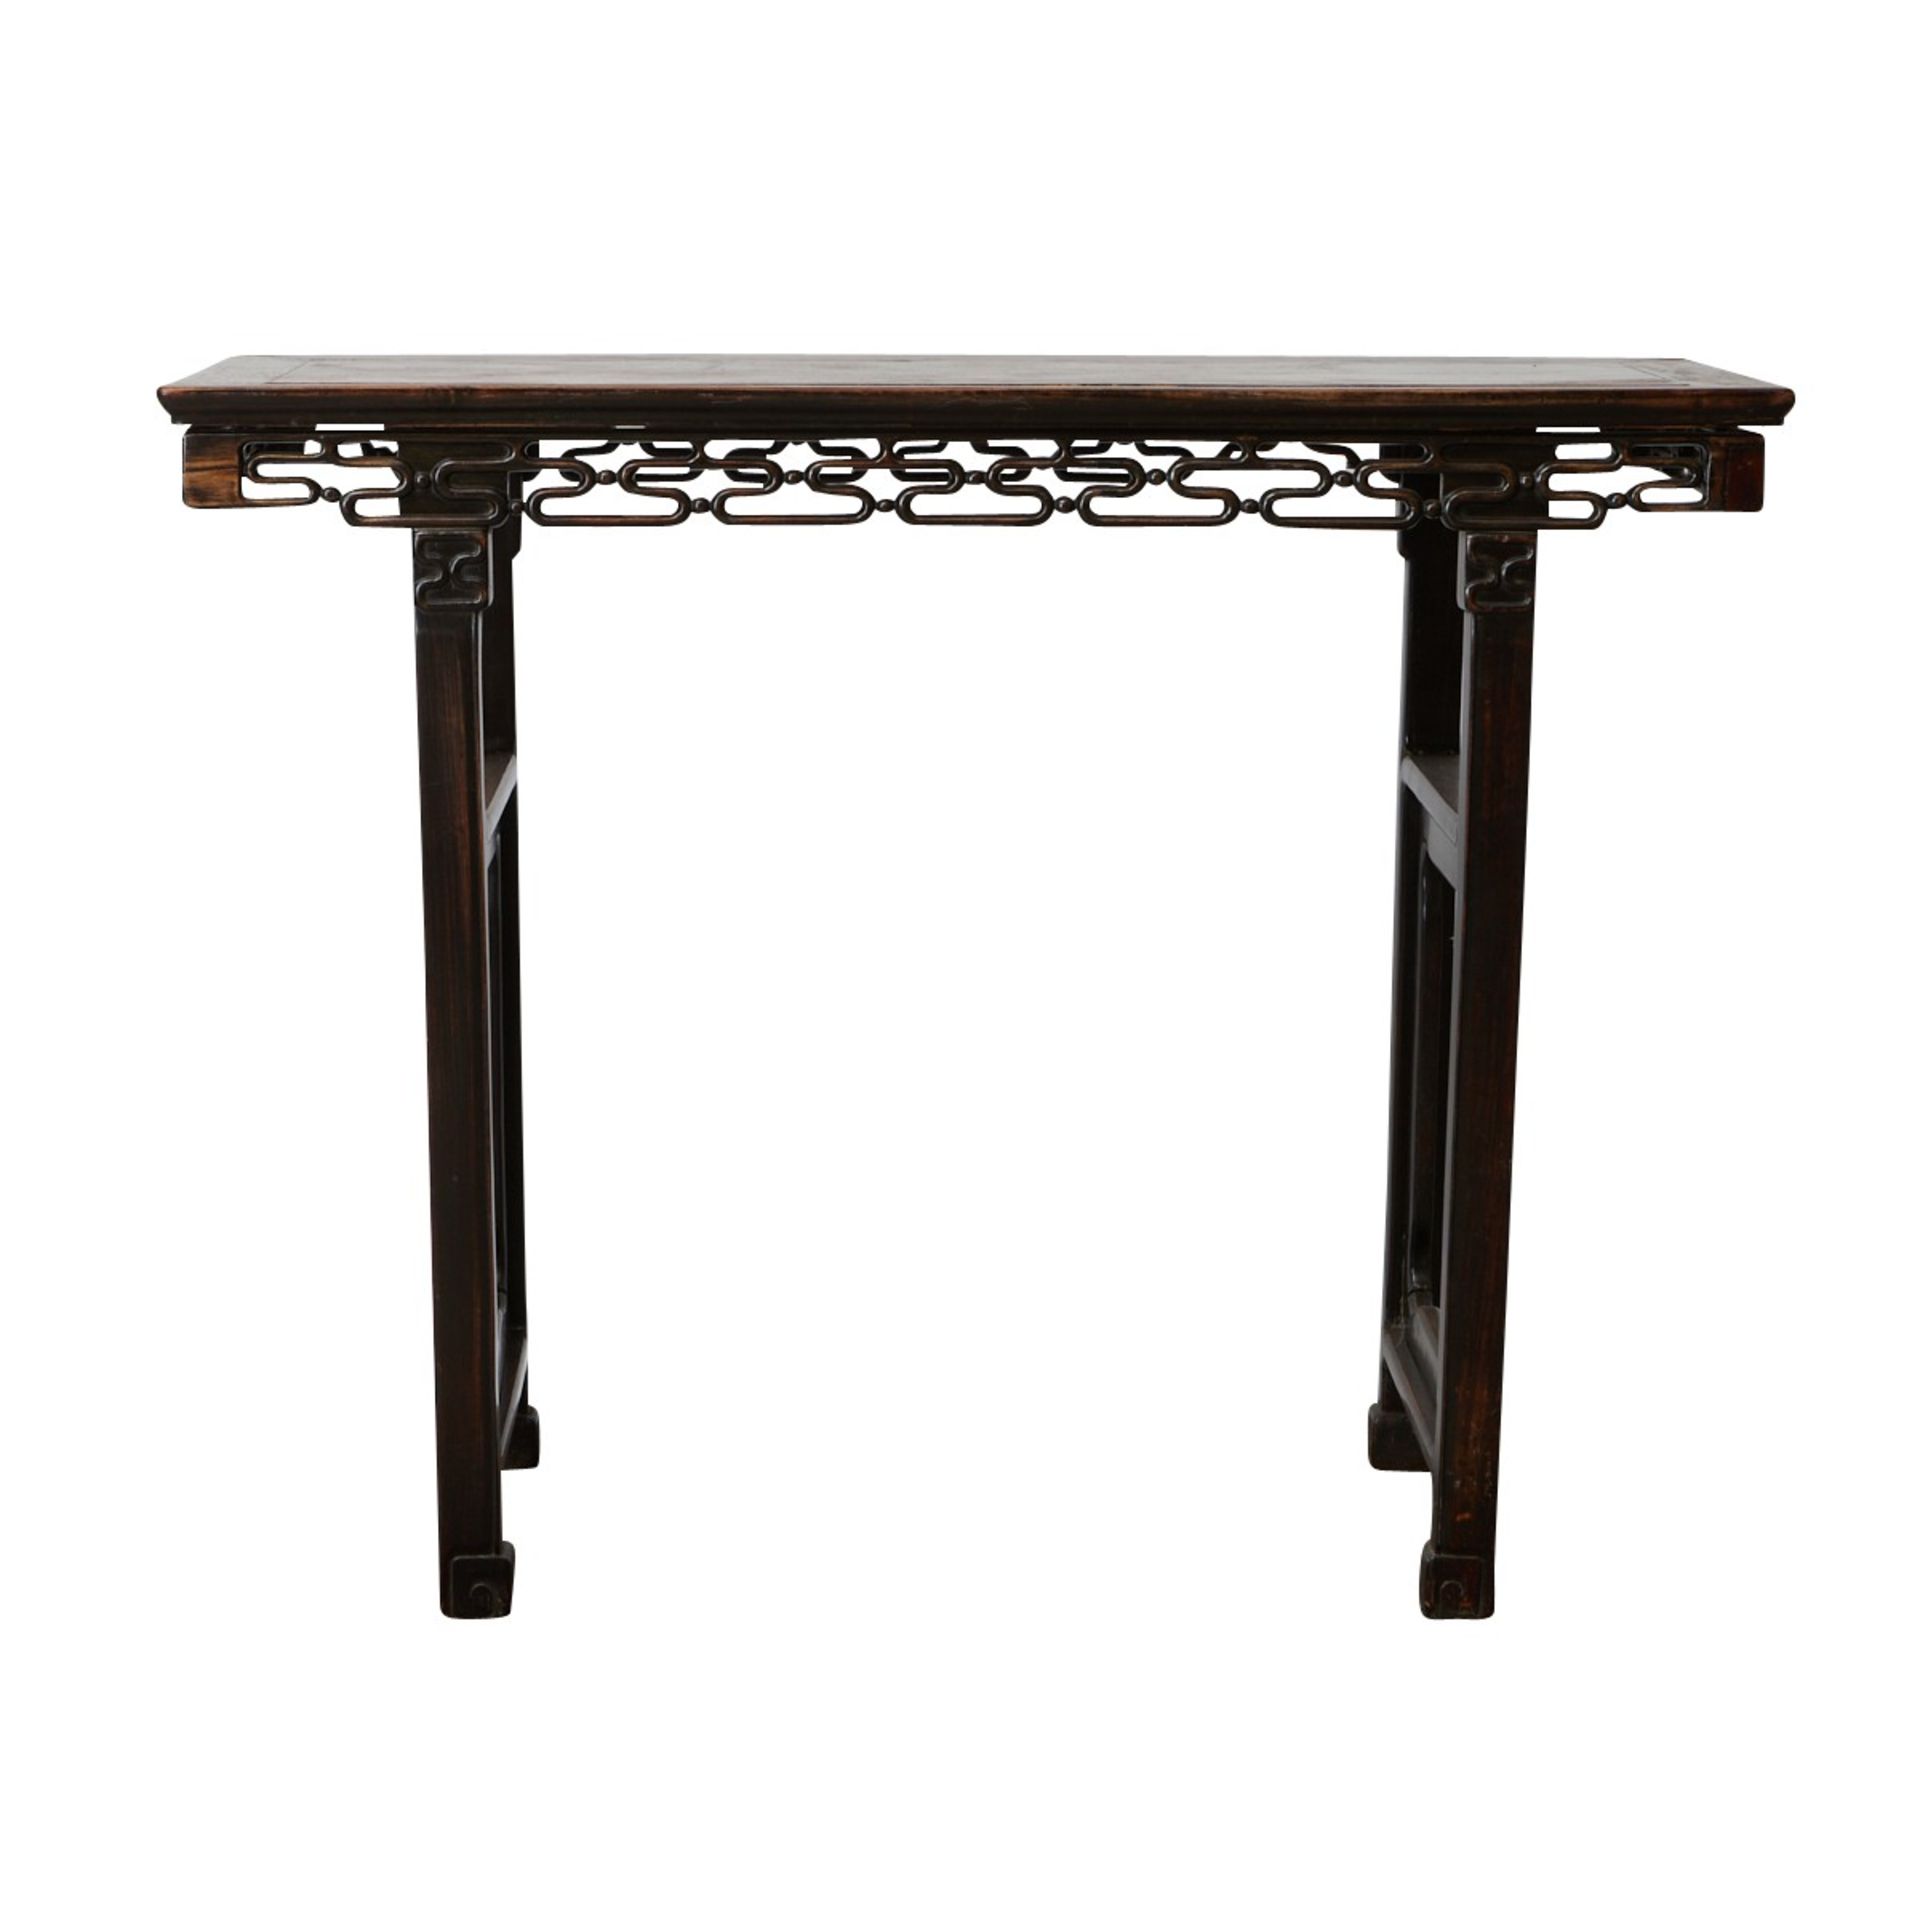 19th c. Chinese Hardwood Altar Table - Image 6 of 11